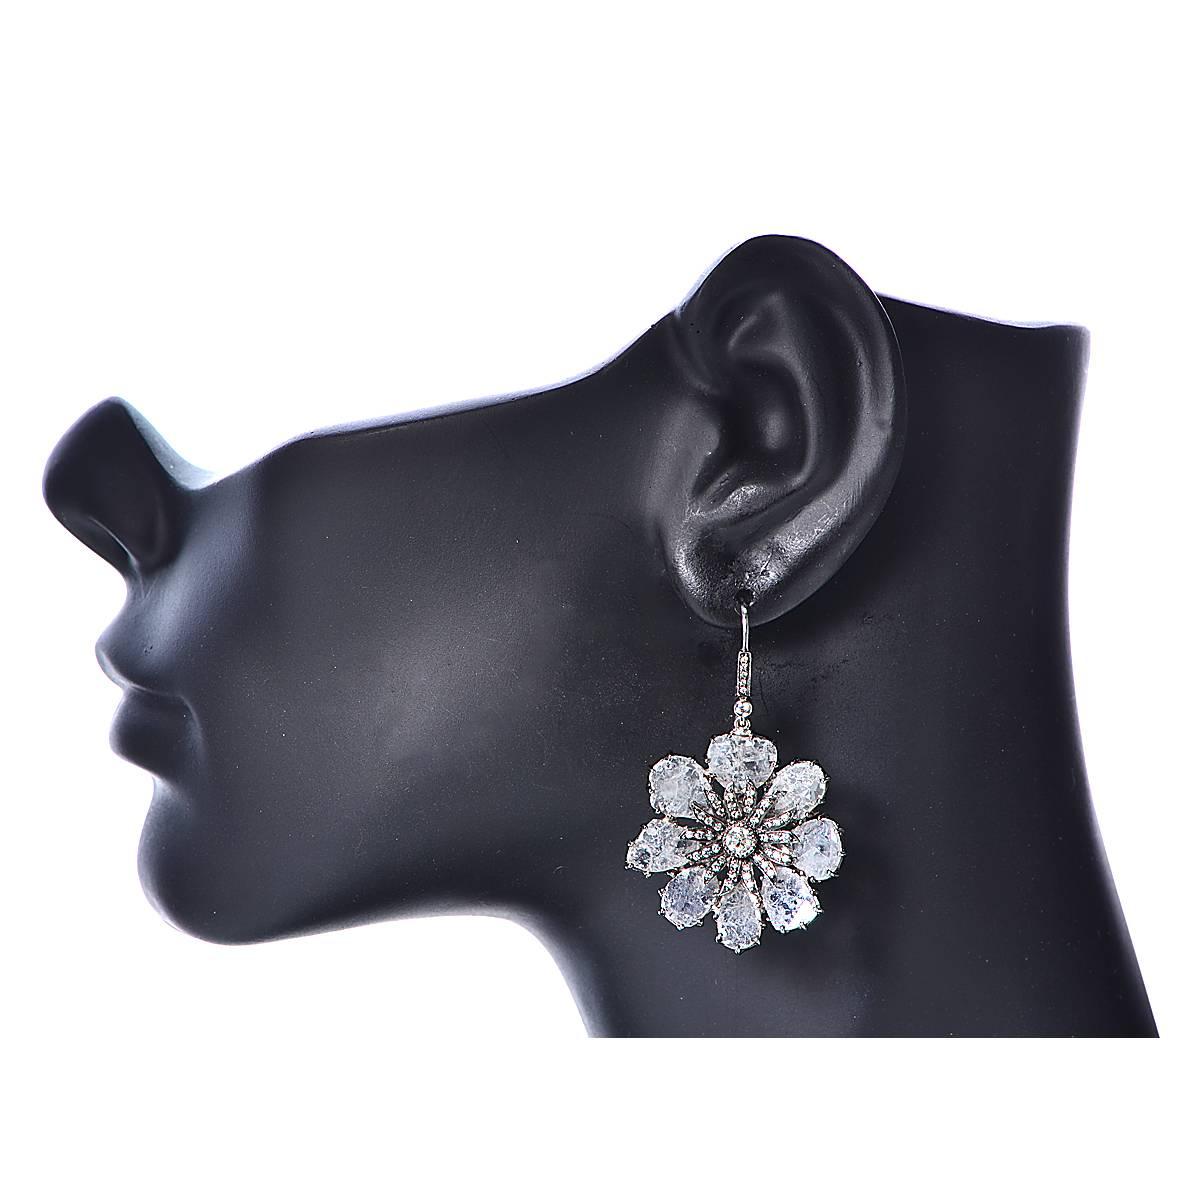 Stunning Vivid Diamonds earrings crafted in 18 Karat White Gold, featuring diamond slices weighing approximately 14.14 carats total. The diamond slices are arranged in gorgeous flowers, capturing the unparalleled beauty of nature.